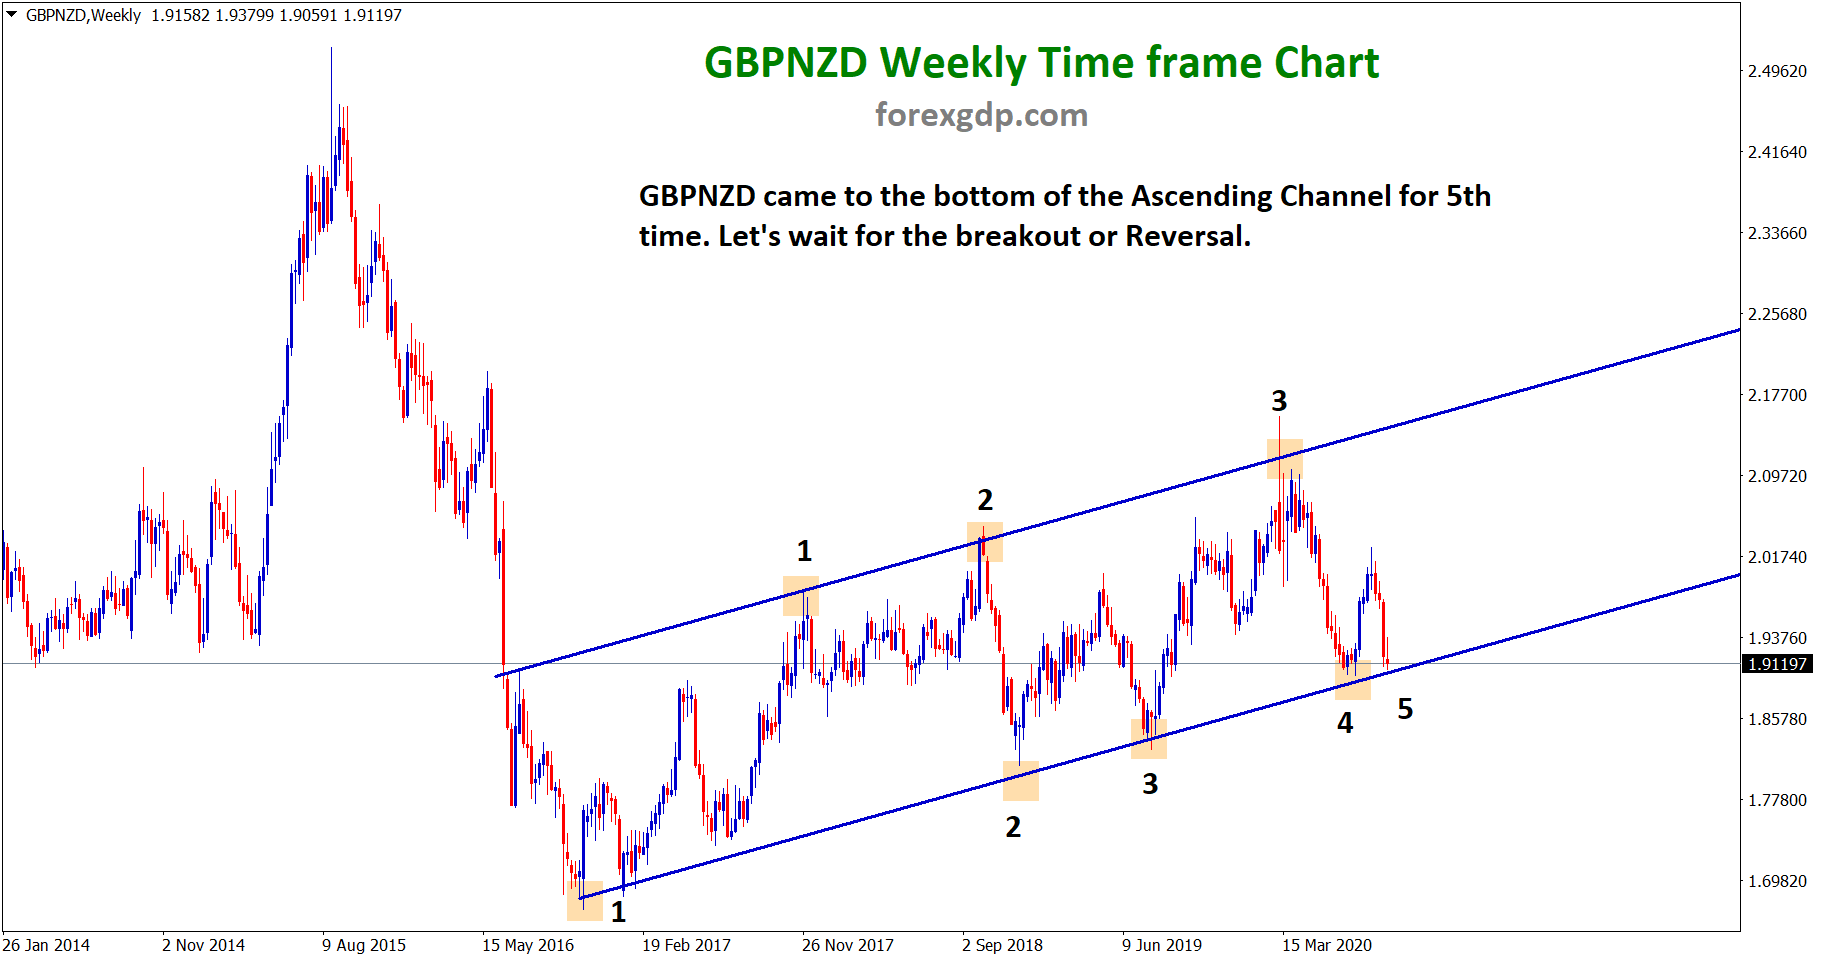 GBPNZD Ascending channel breakout in fifth attempt